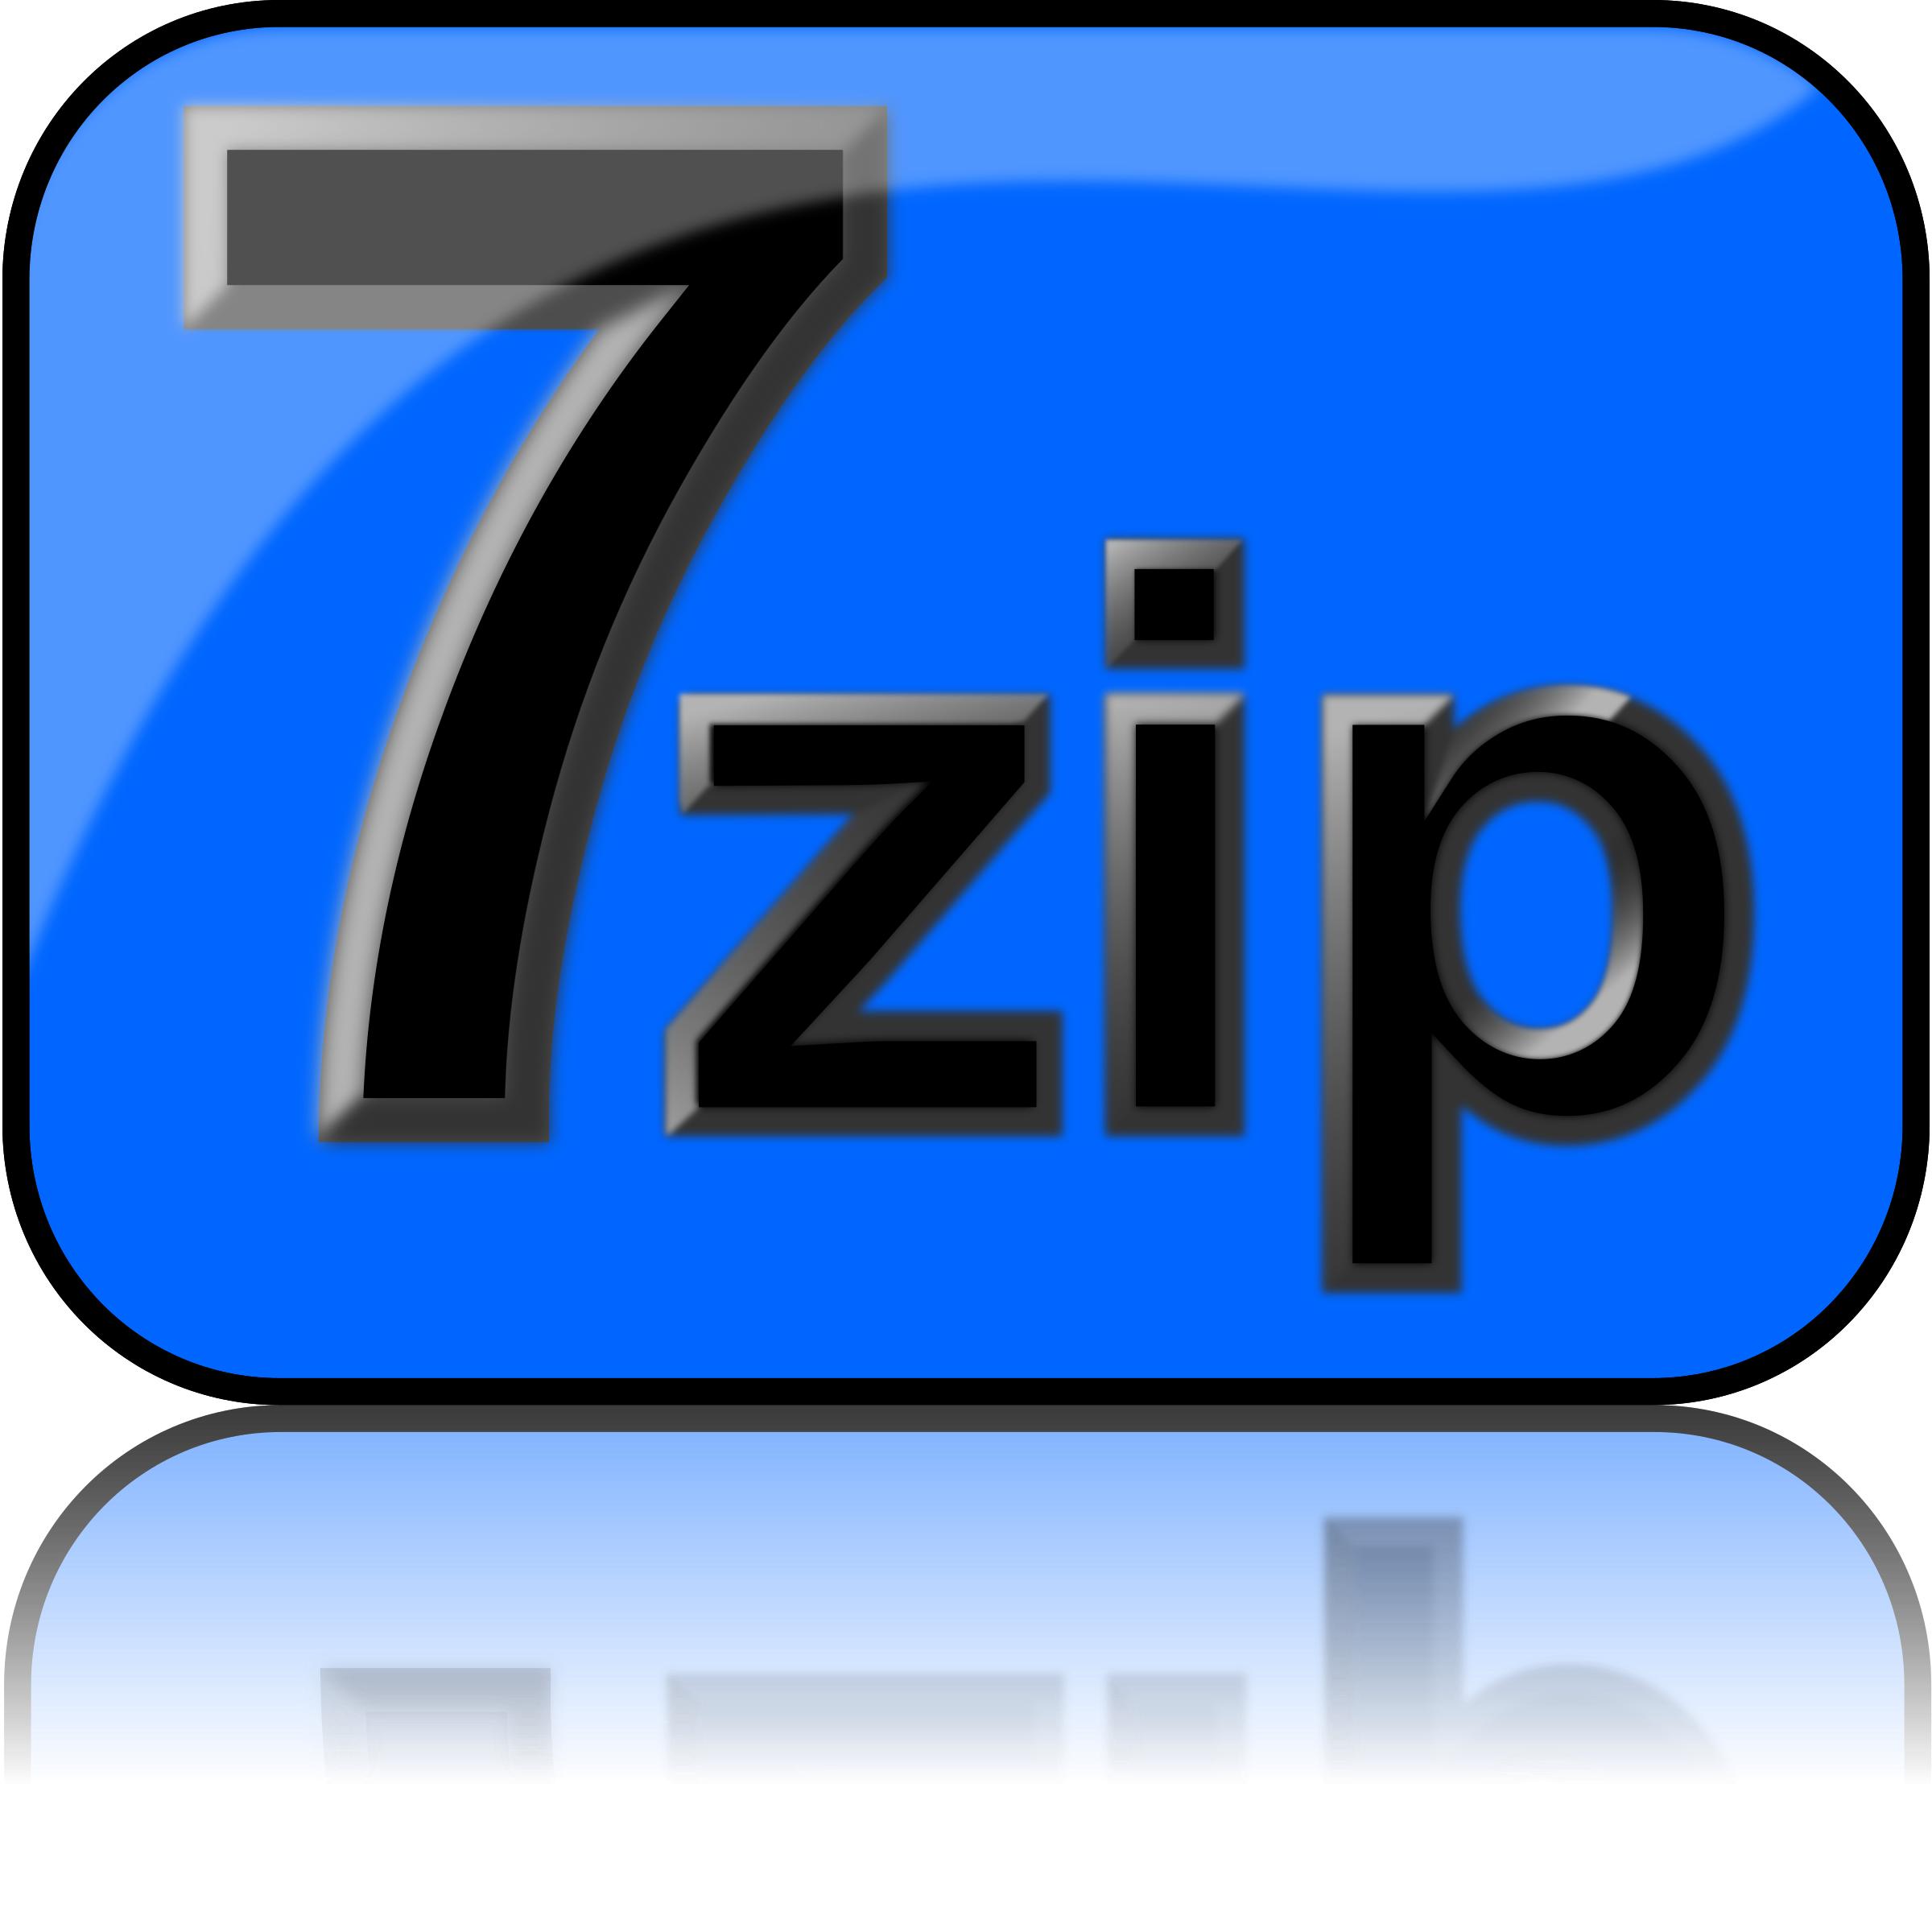 7zip Glossy Extrude Blue png